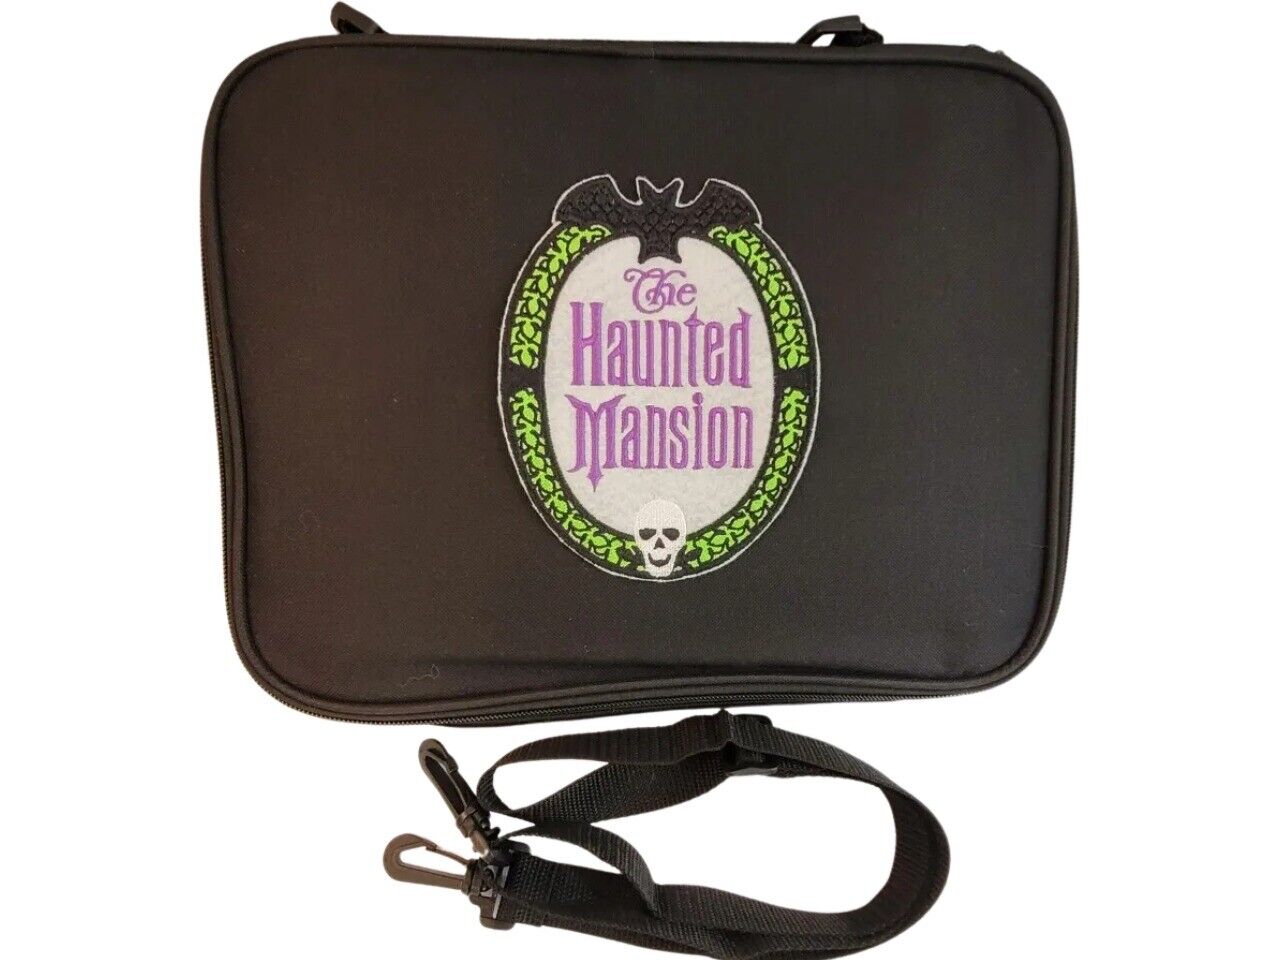 Haunted Mansion Logo Embroidery Pin Book Bag for Disney Pin Trading Collections